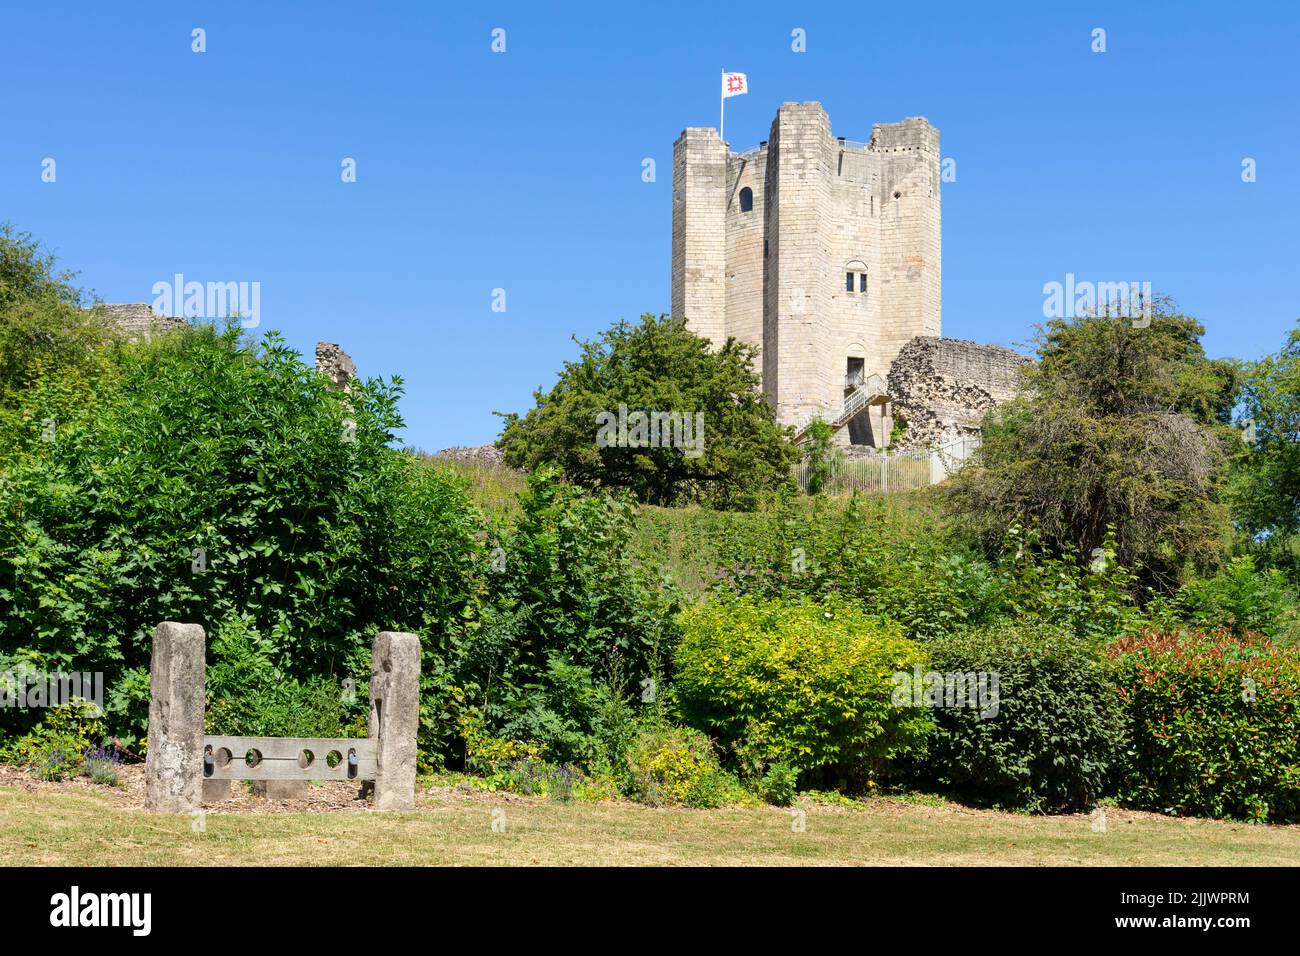 Conisbrough Castle ruins of Conisbrough castle above Coronation park with stocks in Conisbrough near Doncaster South Yorkshire England Uk GB Europe Stock Photo